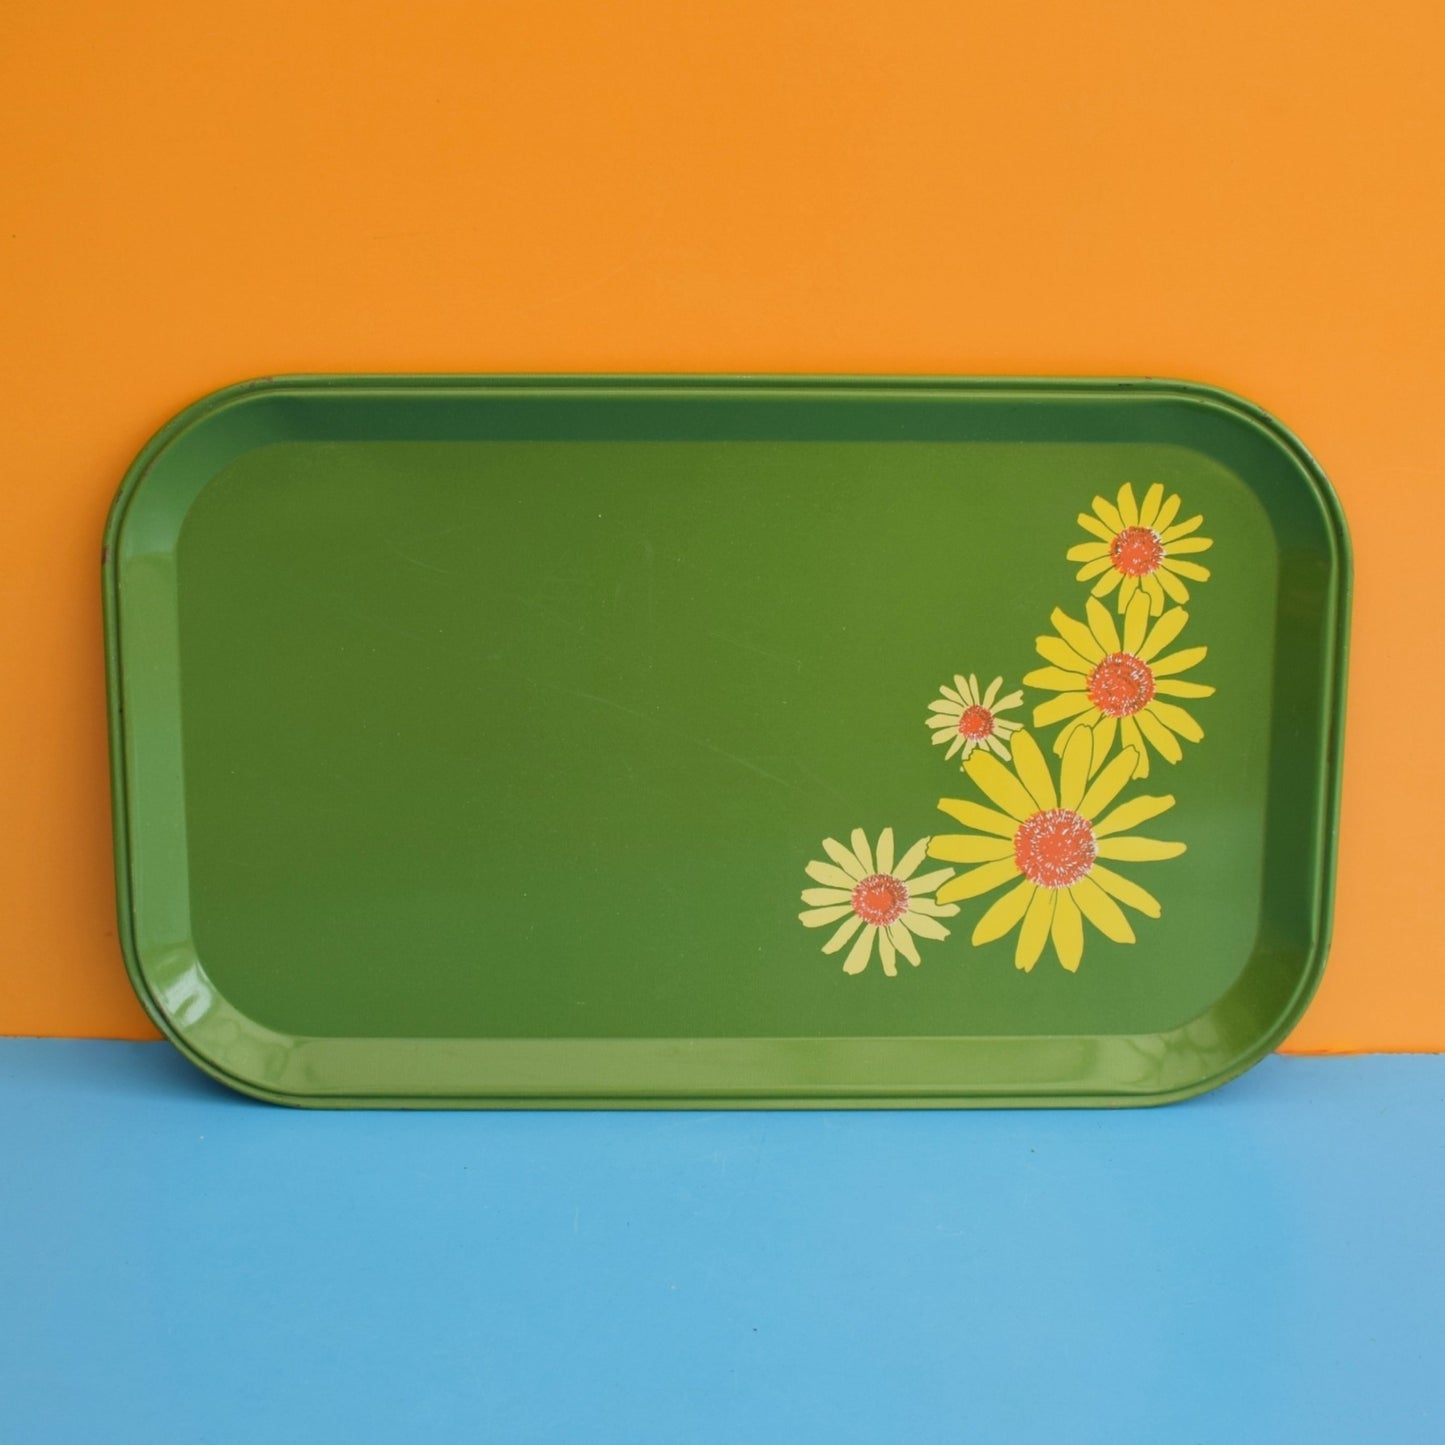 Vintage 1960s American Tin Tray - Flower Power .